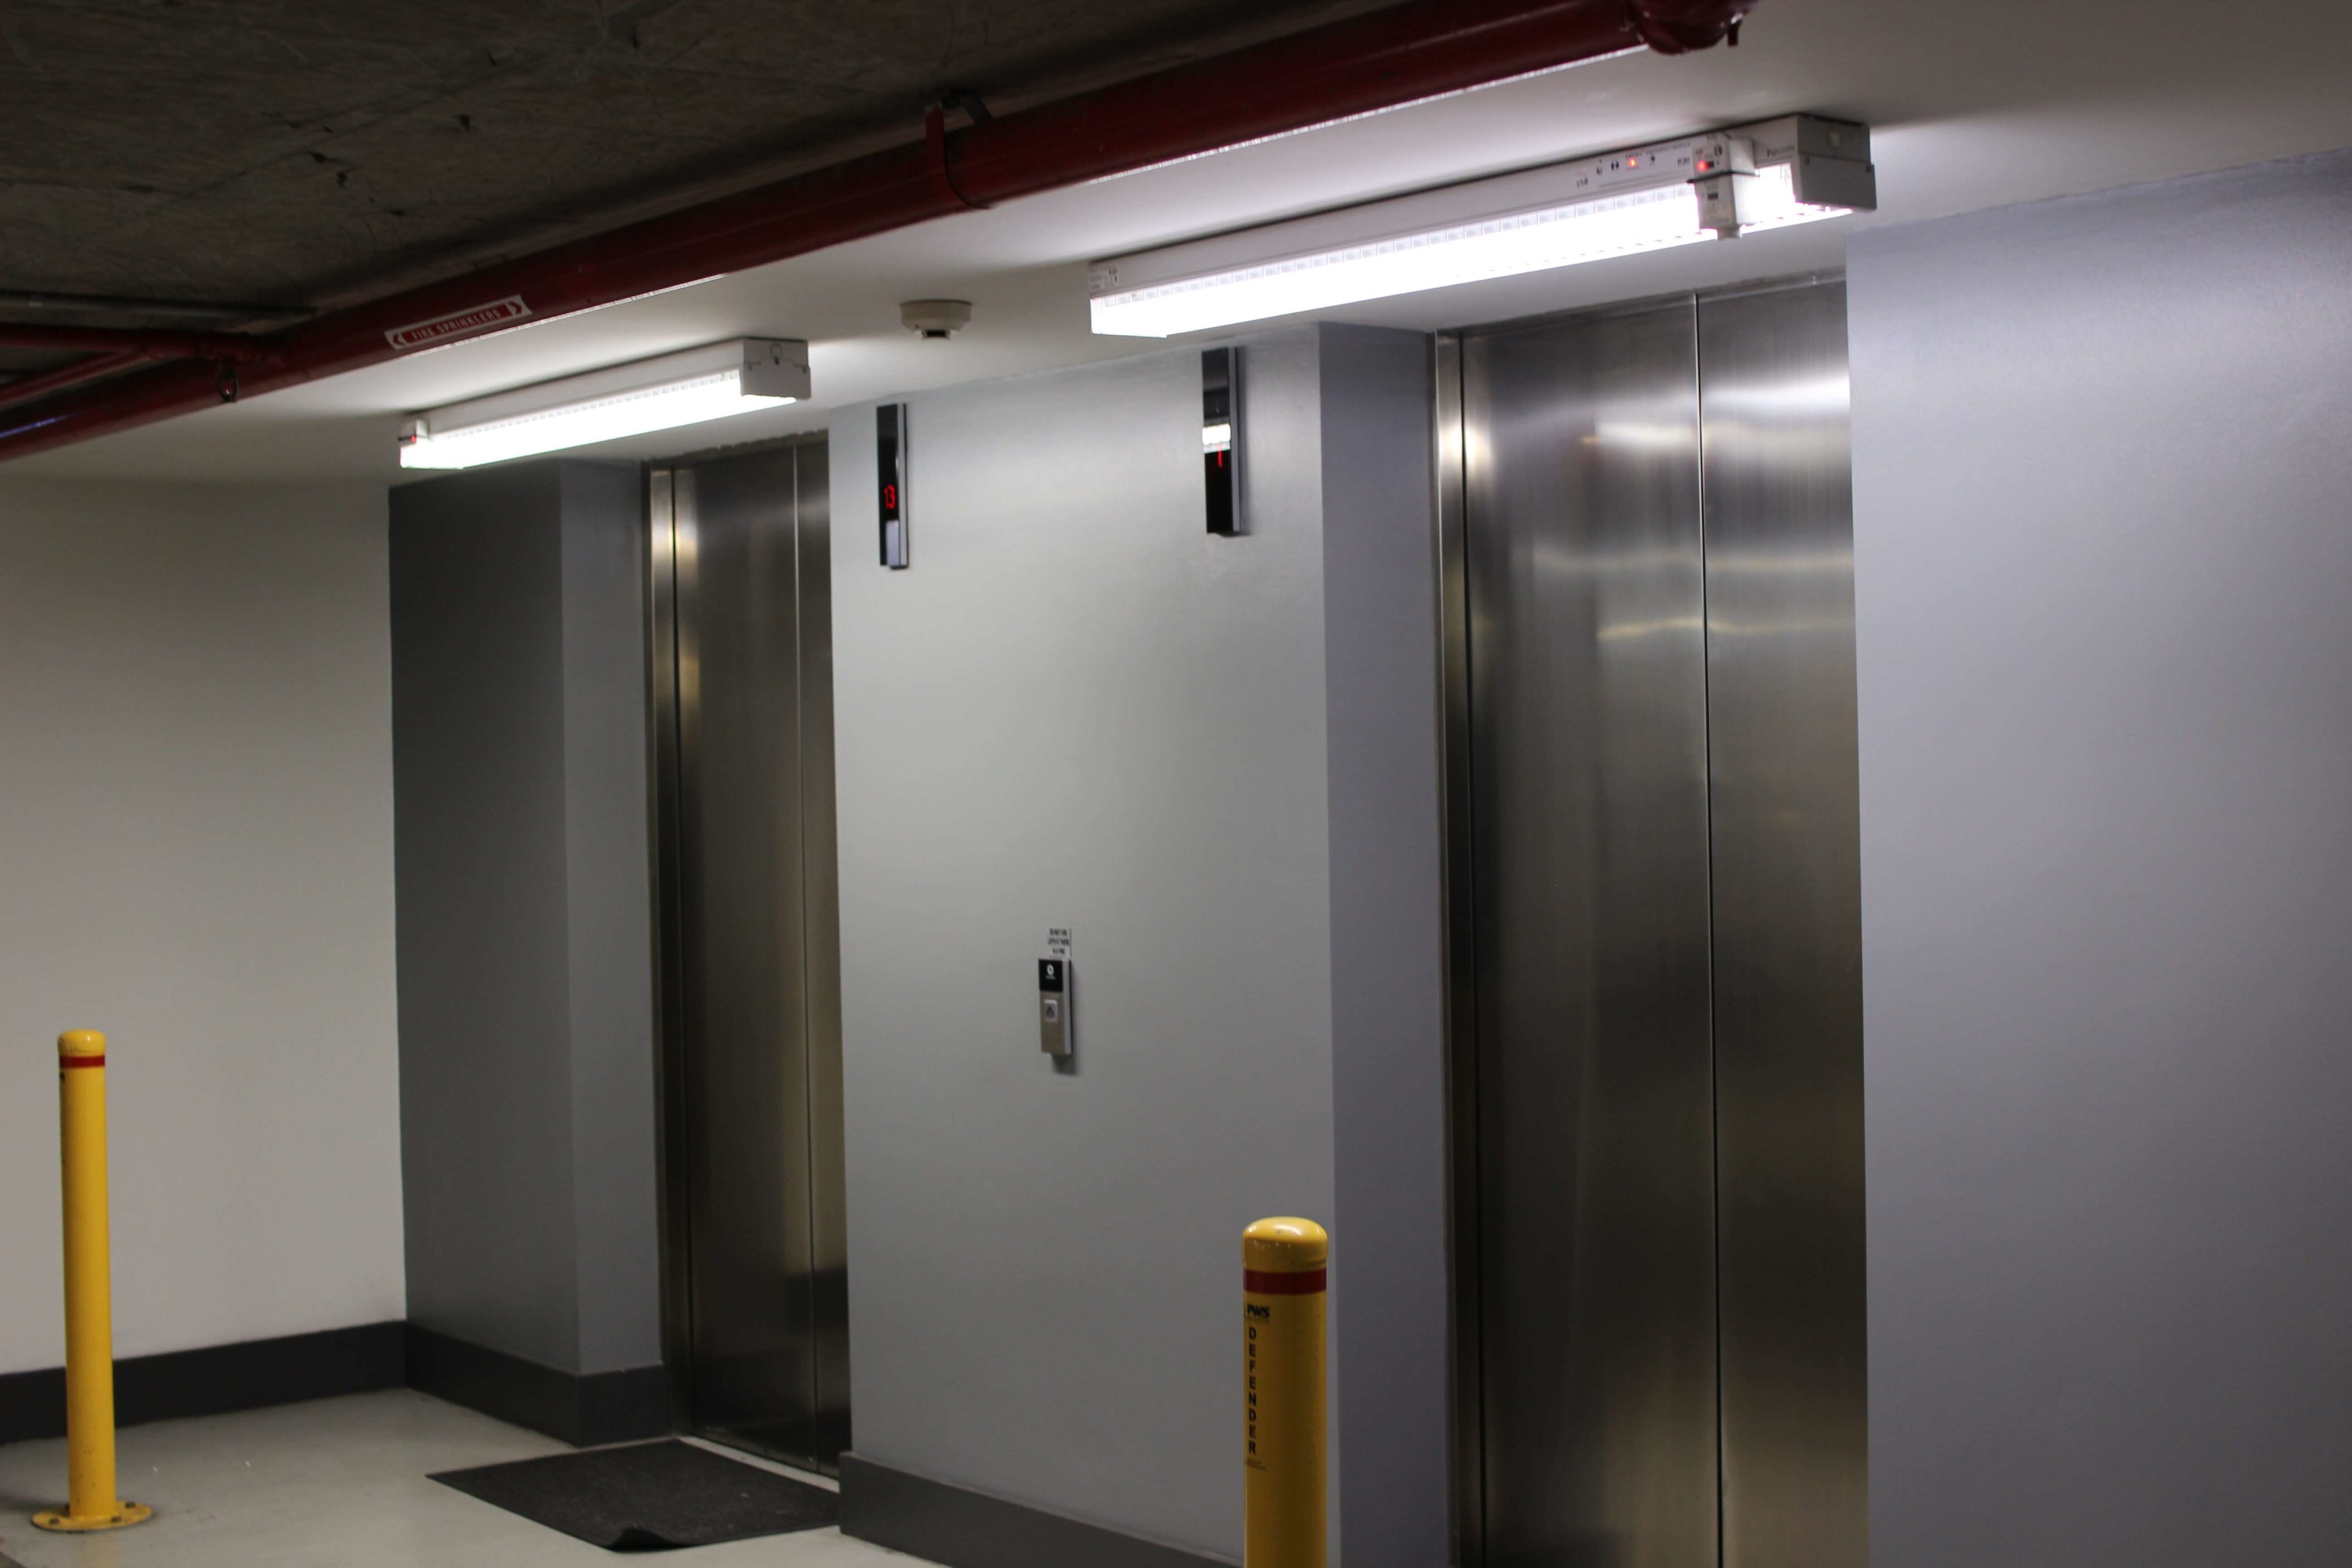 What are the NSW emergency lighting replacement requirements?